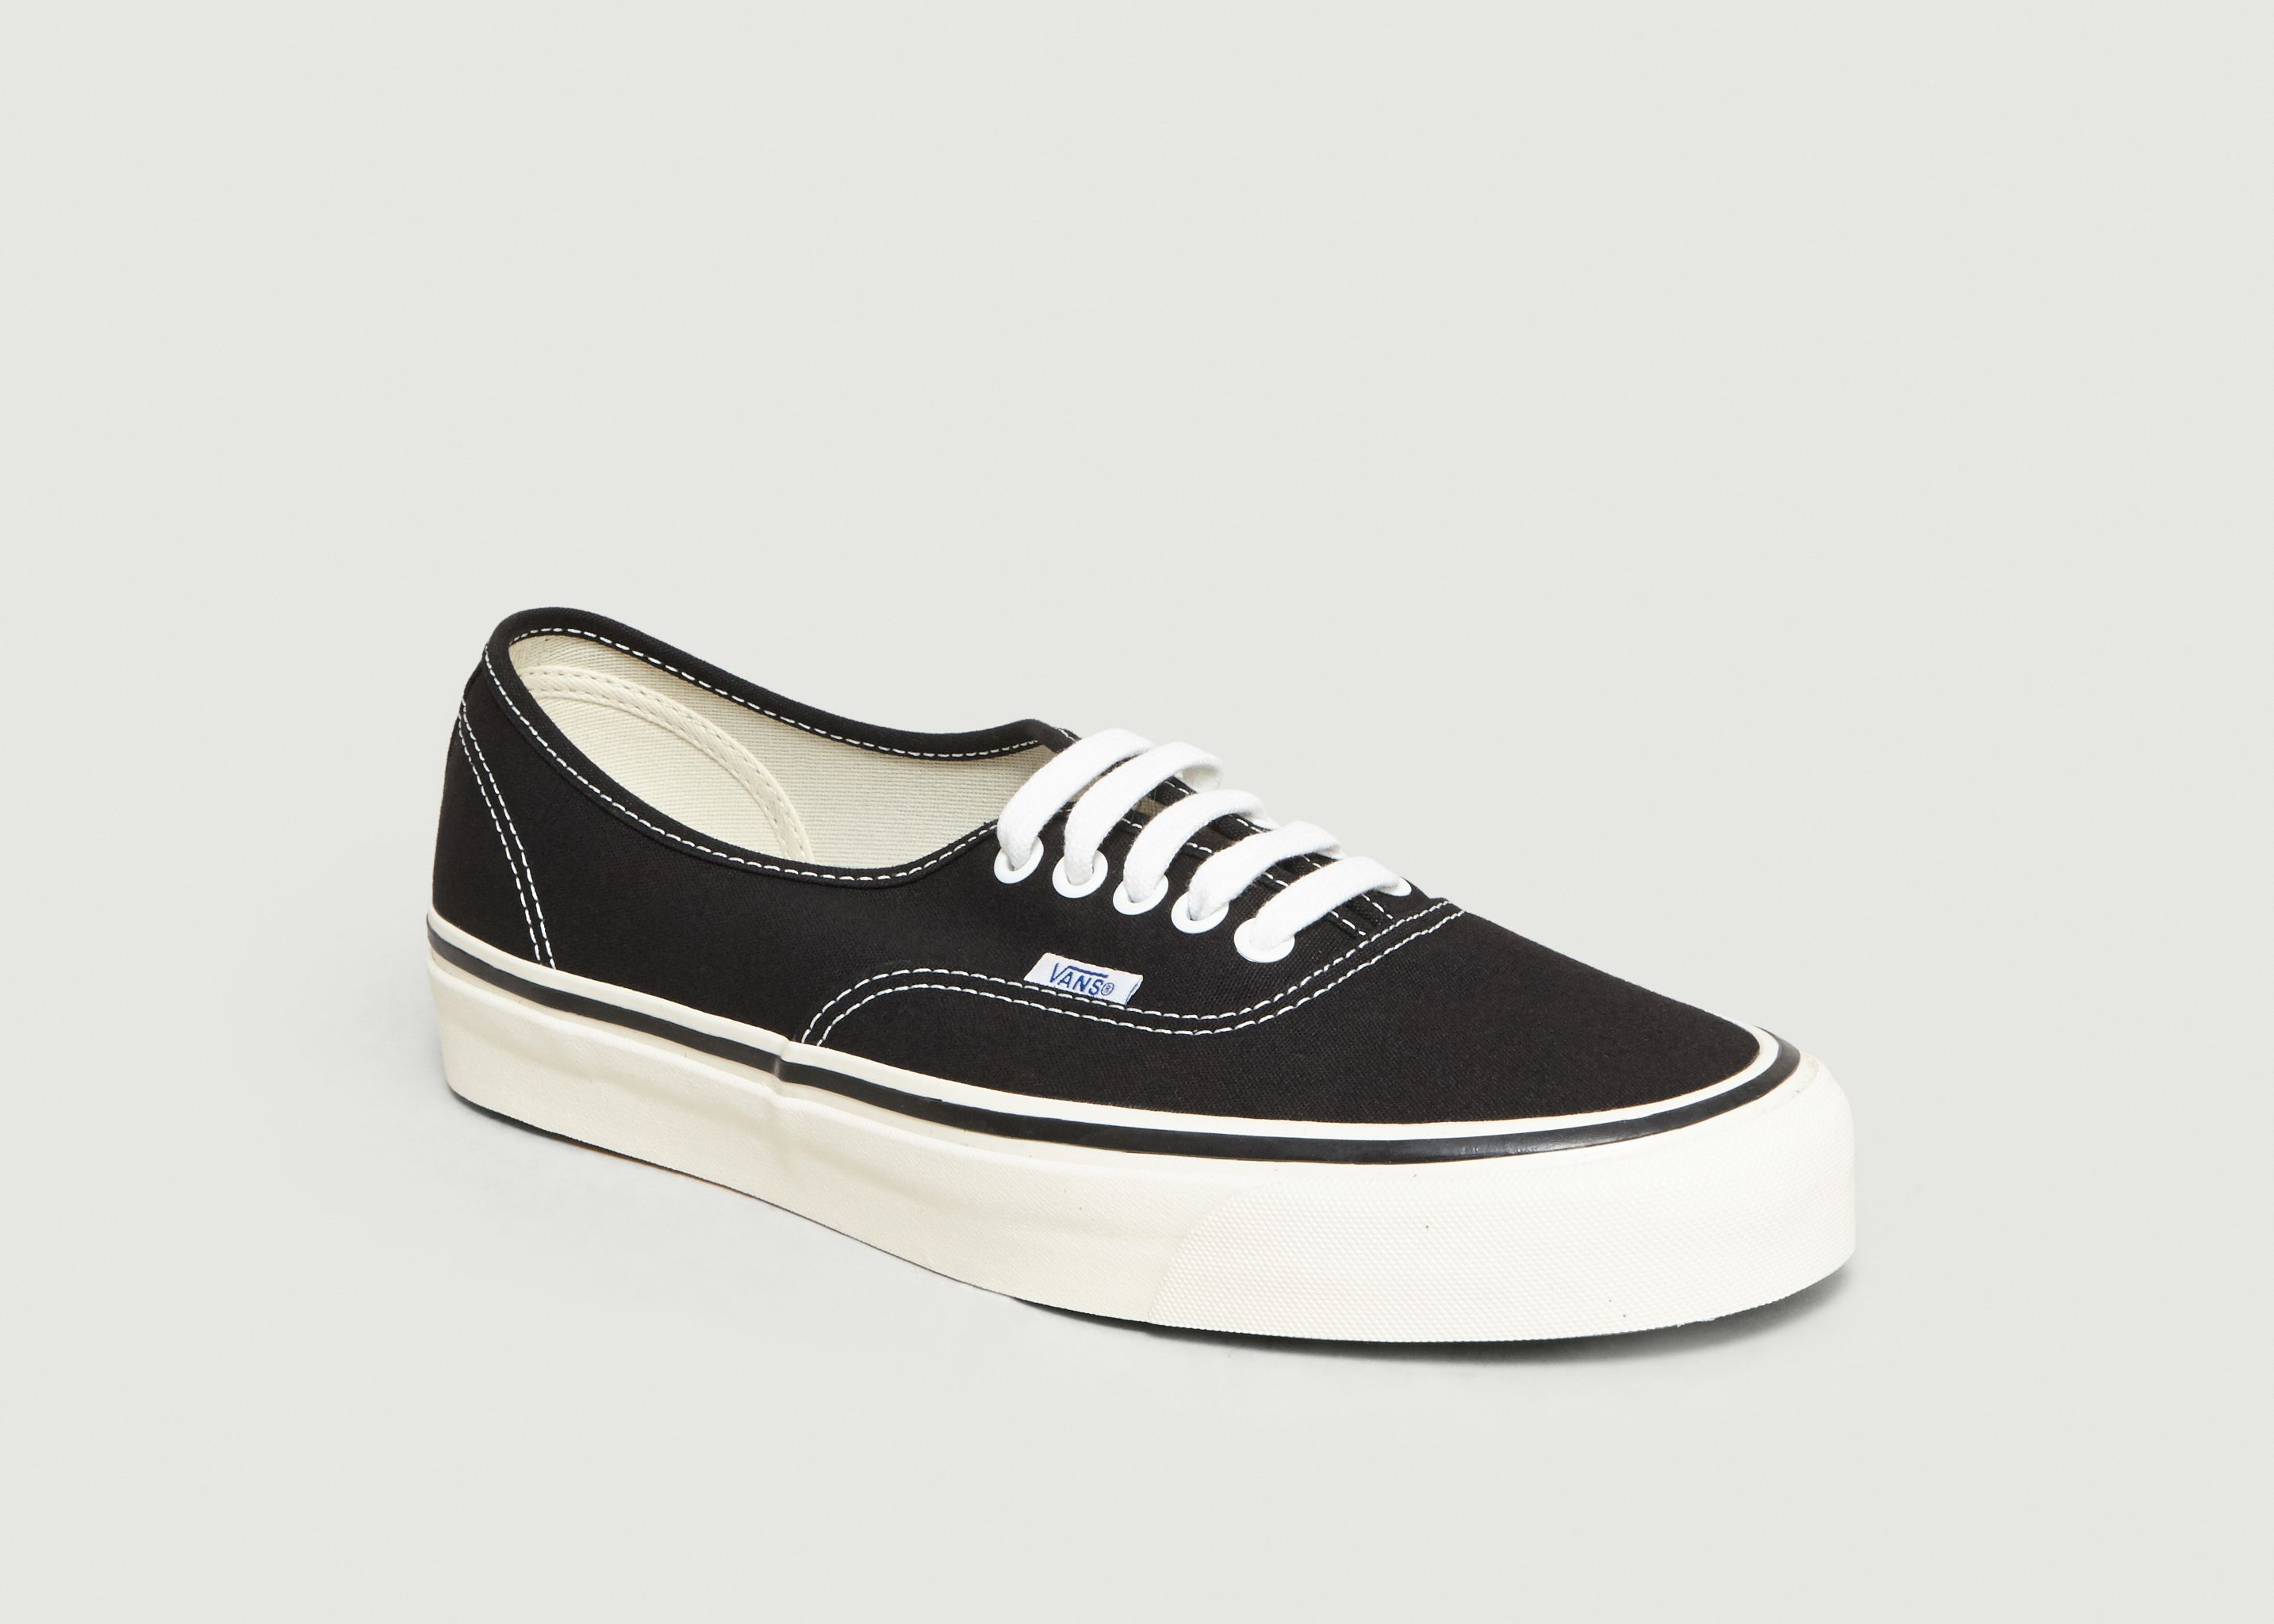 vans contact us email